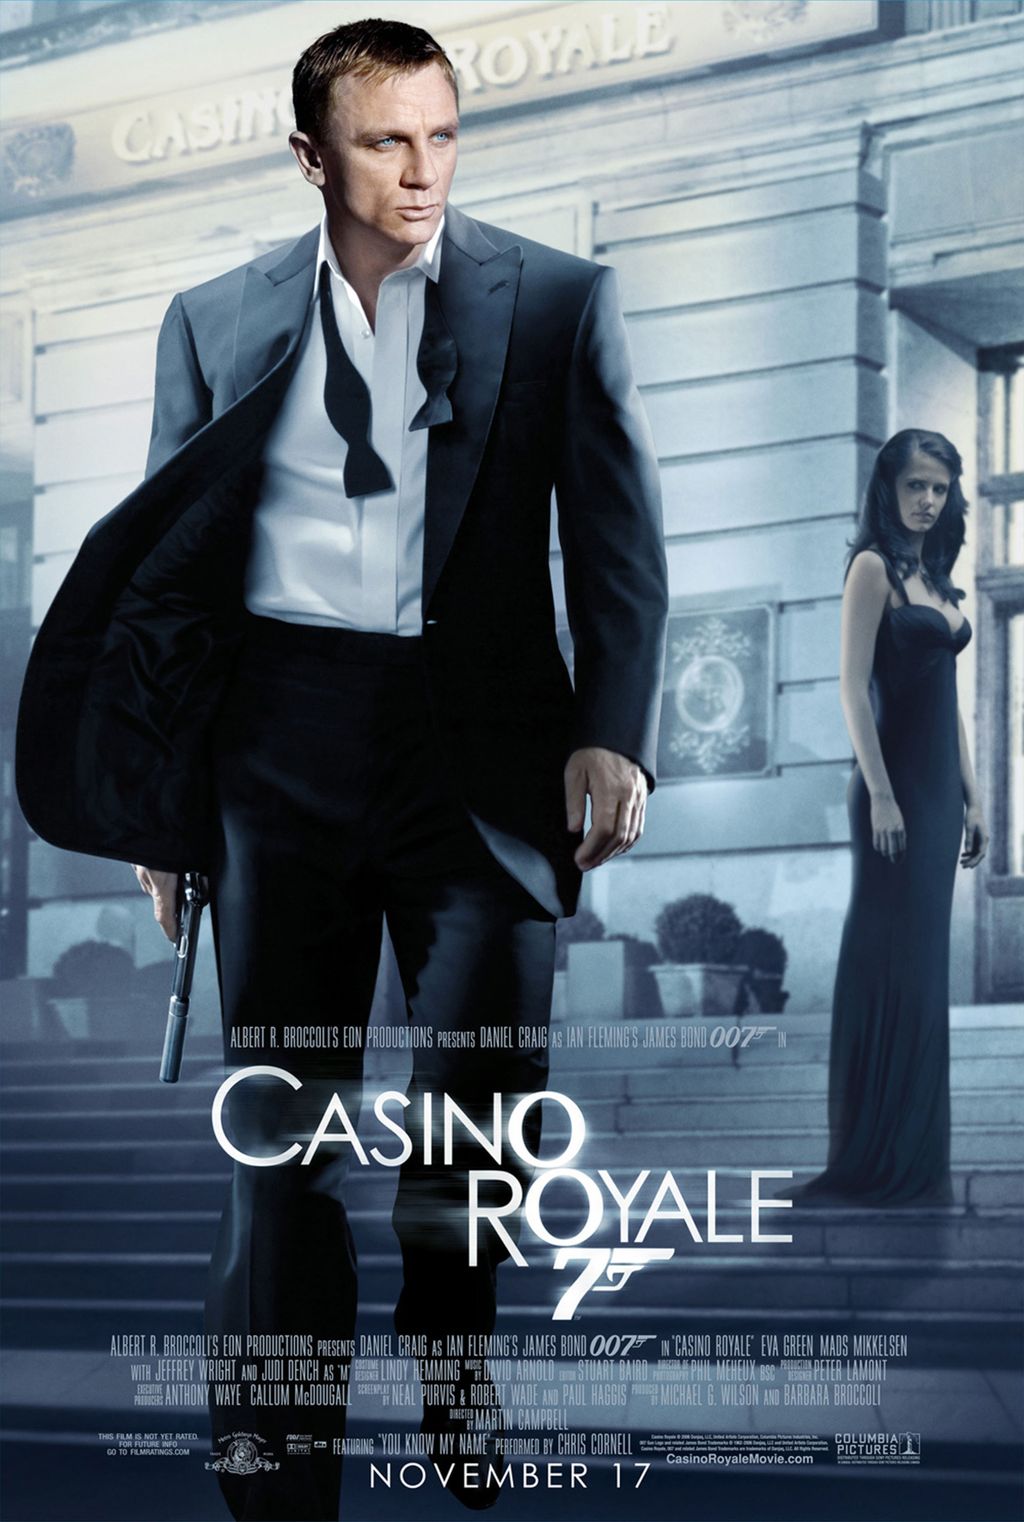 Casino Royale affiche POSTER 